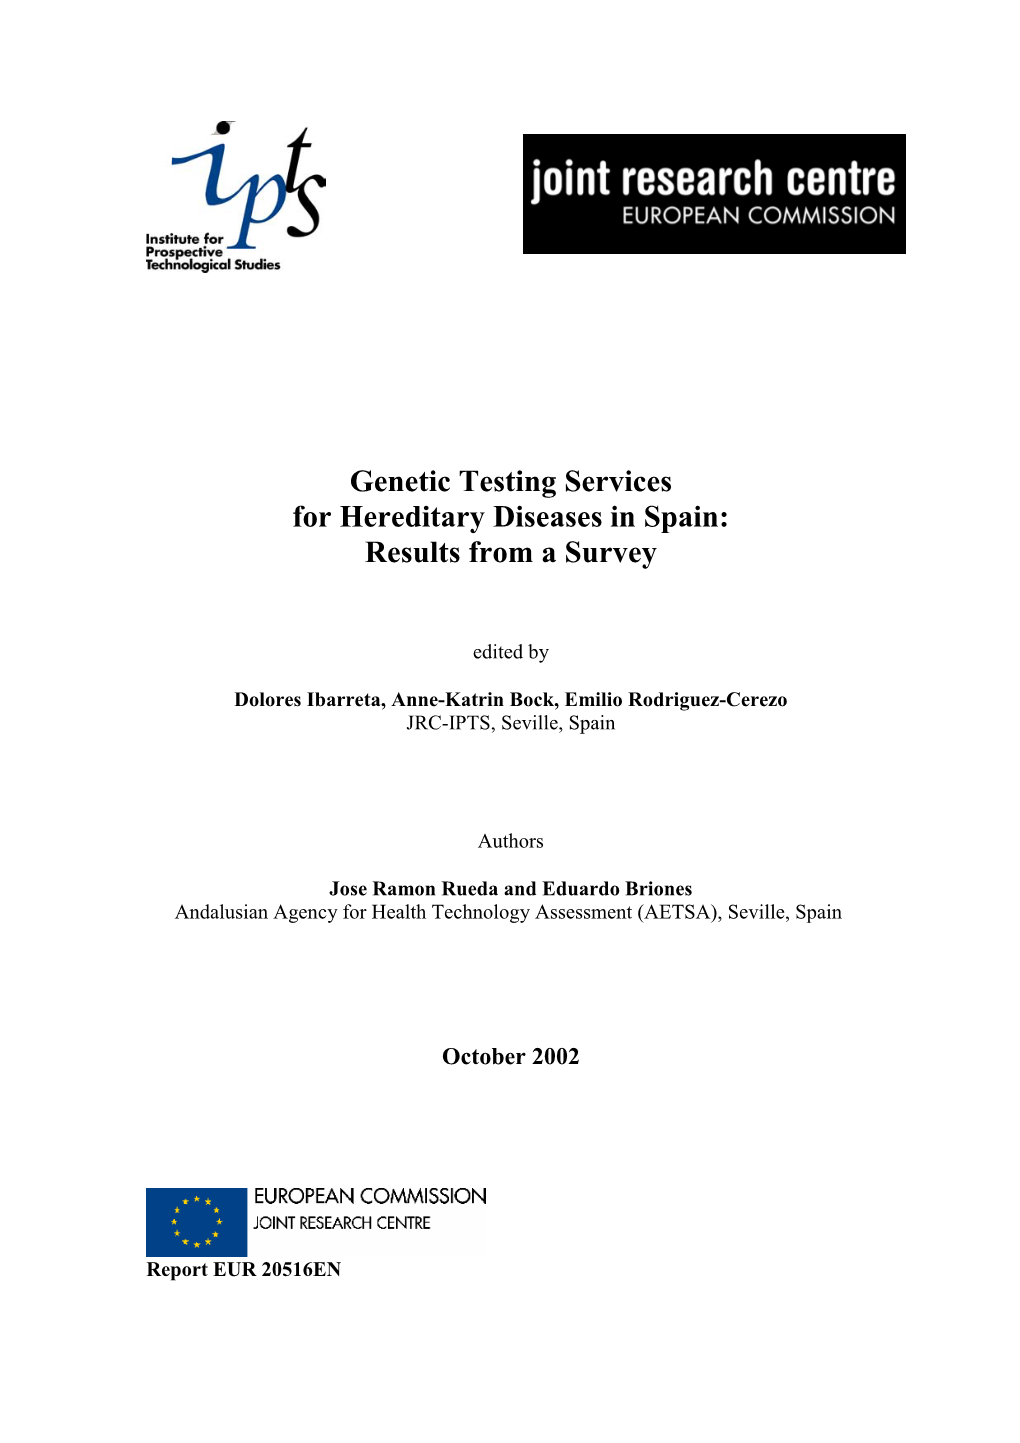 Genetic Testing Services for Hereditary Diseases in Spain: Results from a Survey